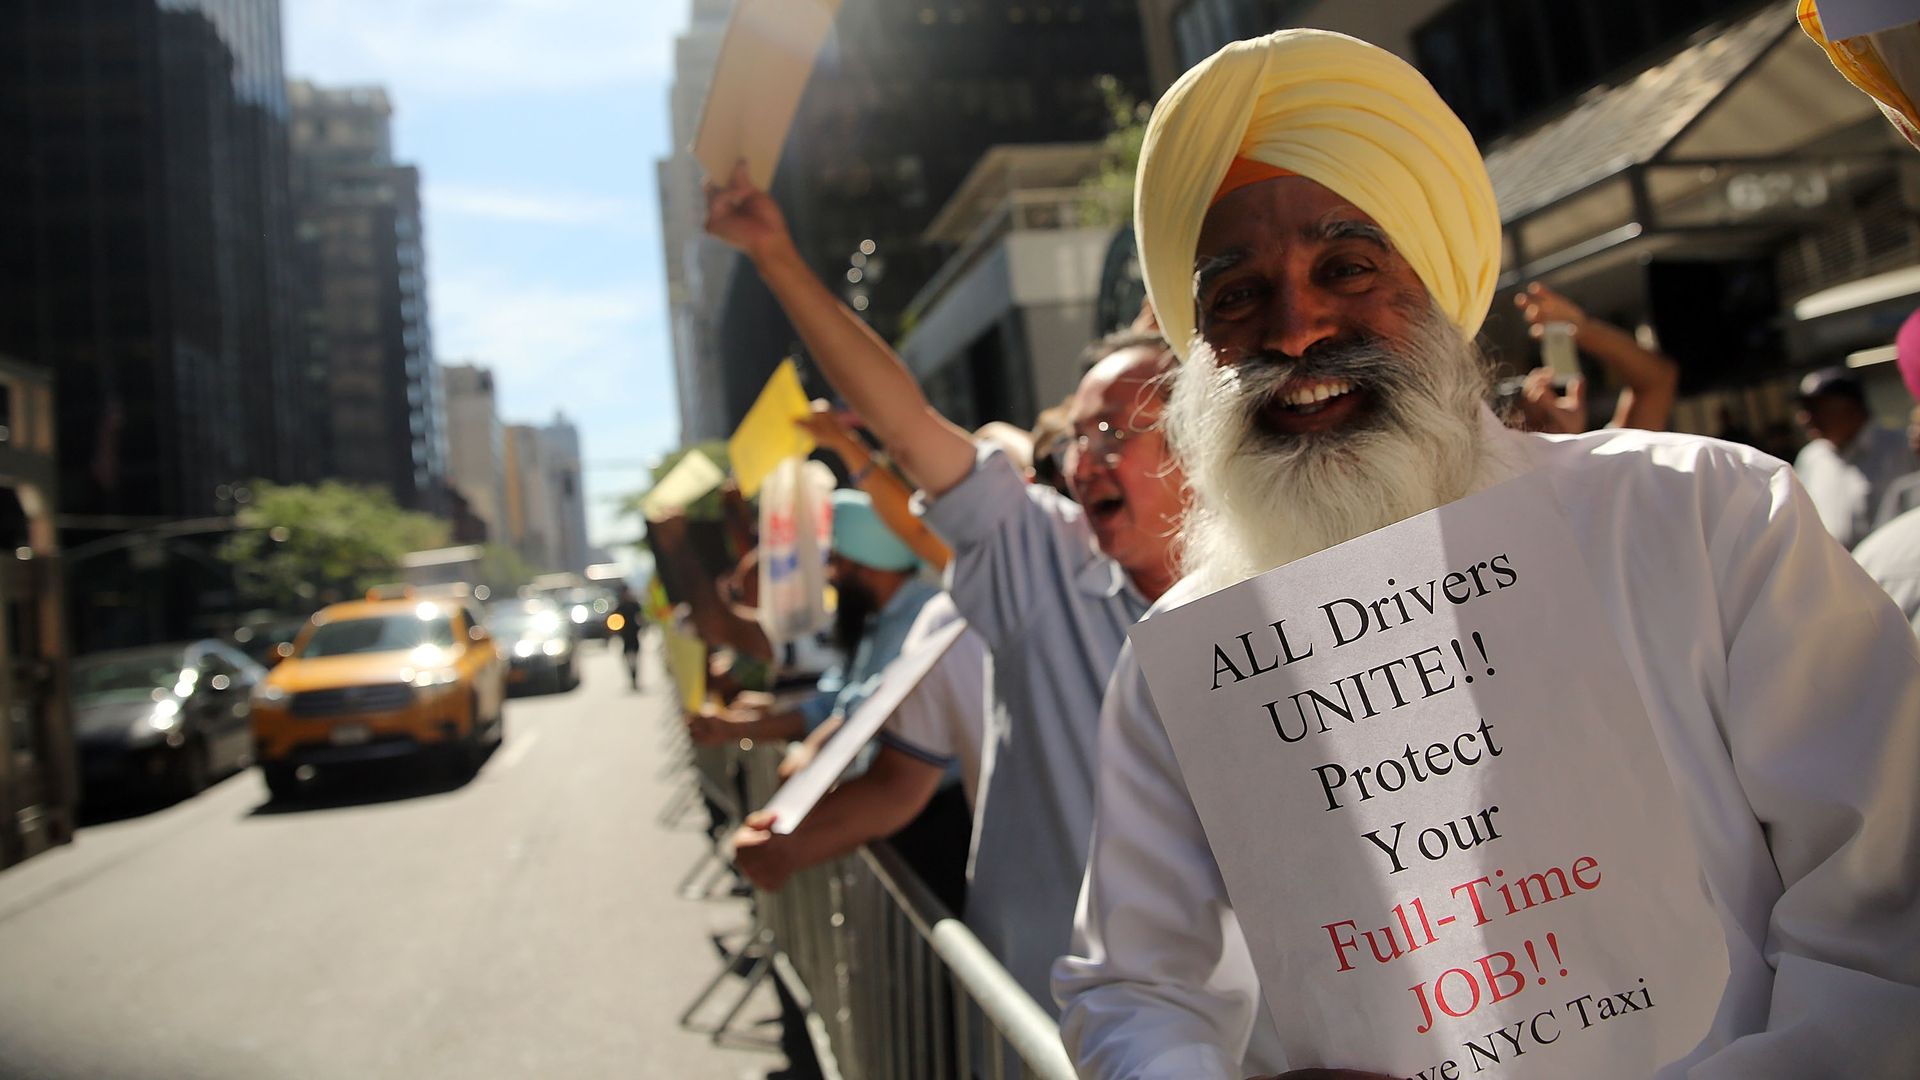 NYC taxi drivers protesting. One holds a sign: "ALL DRIVERS UNITE!! Protect your Full-Time JOB!"